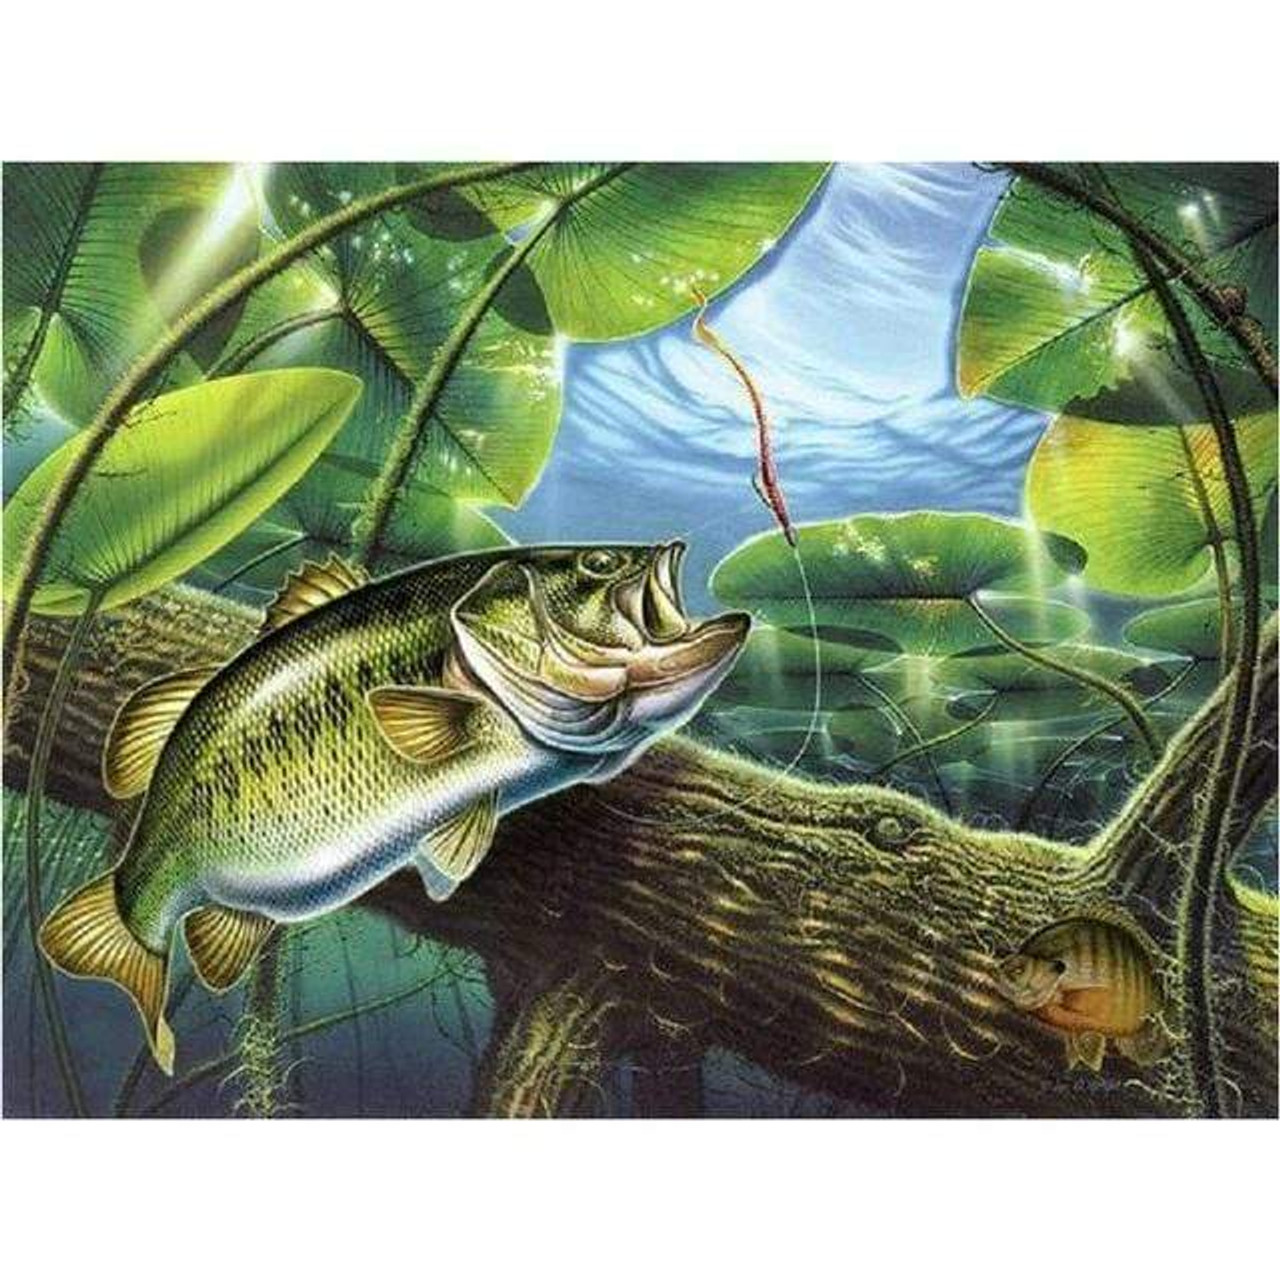 https://cdn11.bigcommerce.com/s-xf1j2e32mt/images/stencil/1280x1280/products/3817/1337/5d-diamond-painting-fish-in-the-pond-kit-23708523724983__57831.1630509833.jpg?c=1